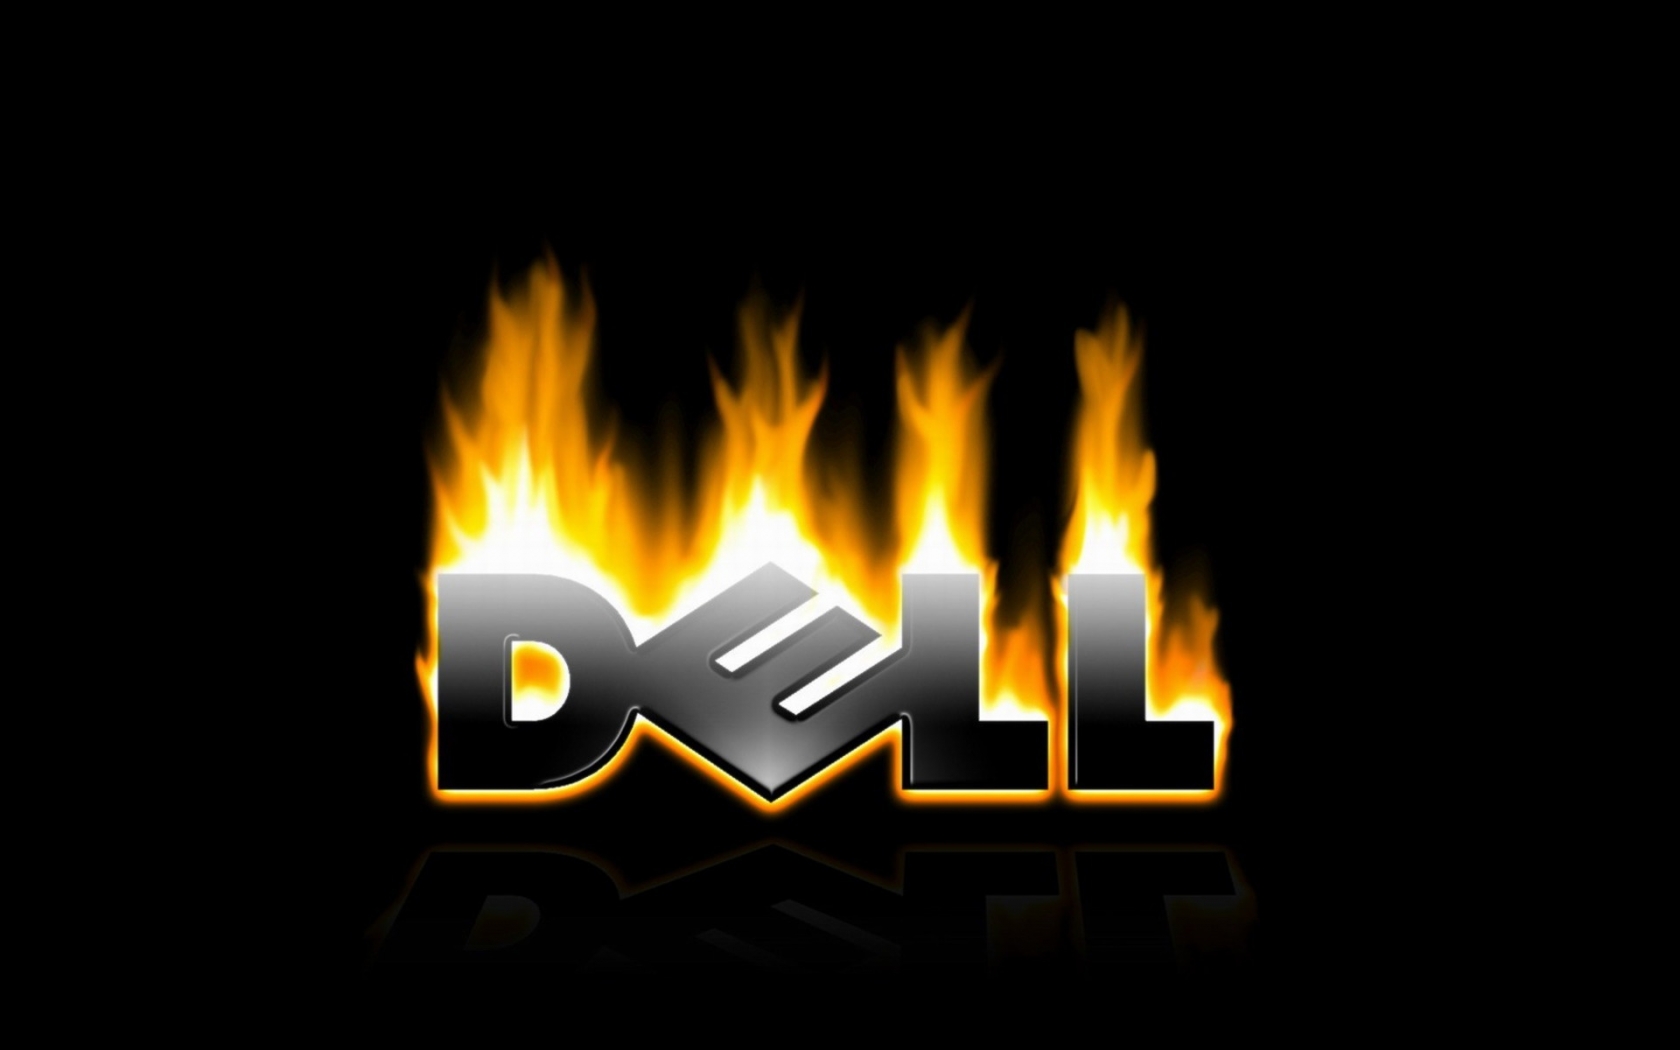 Dell in fire for 1680 x 1050 widescreen resolution